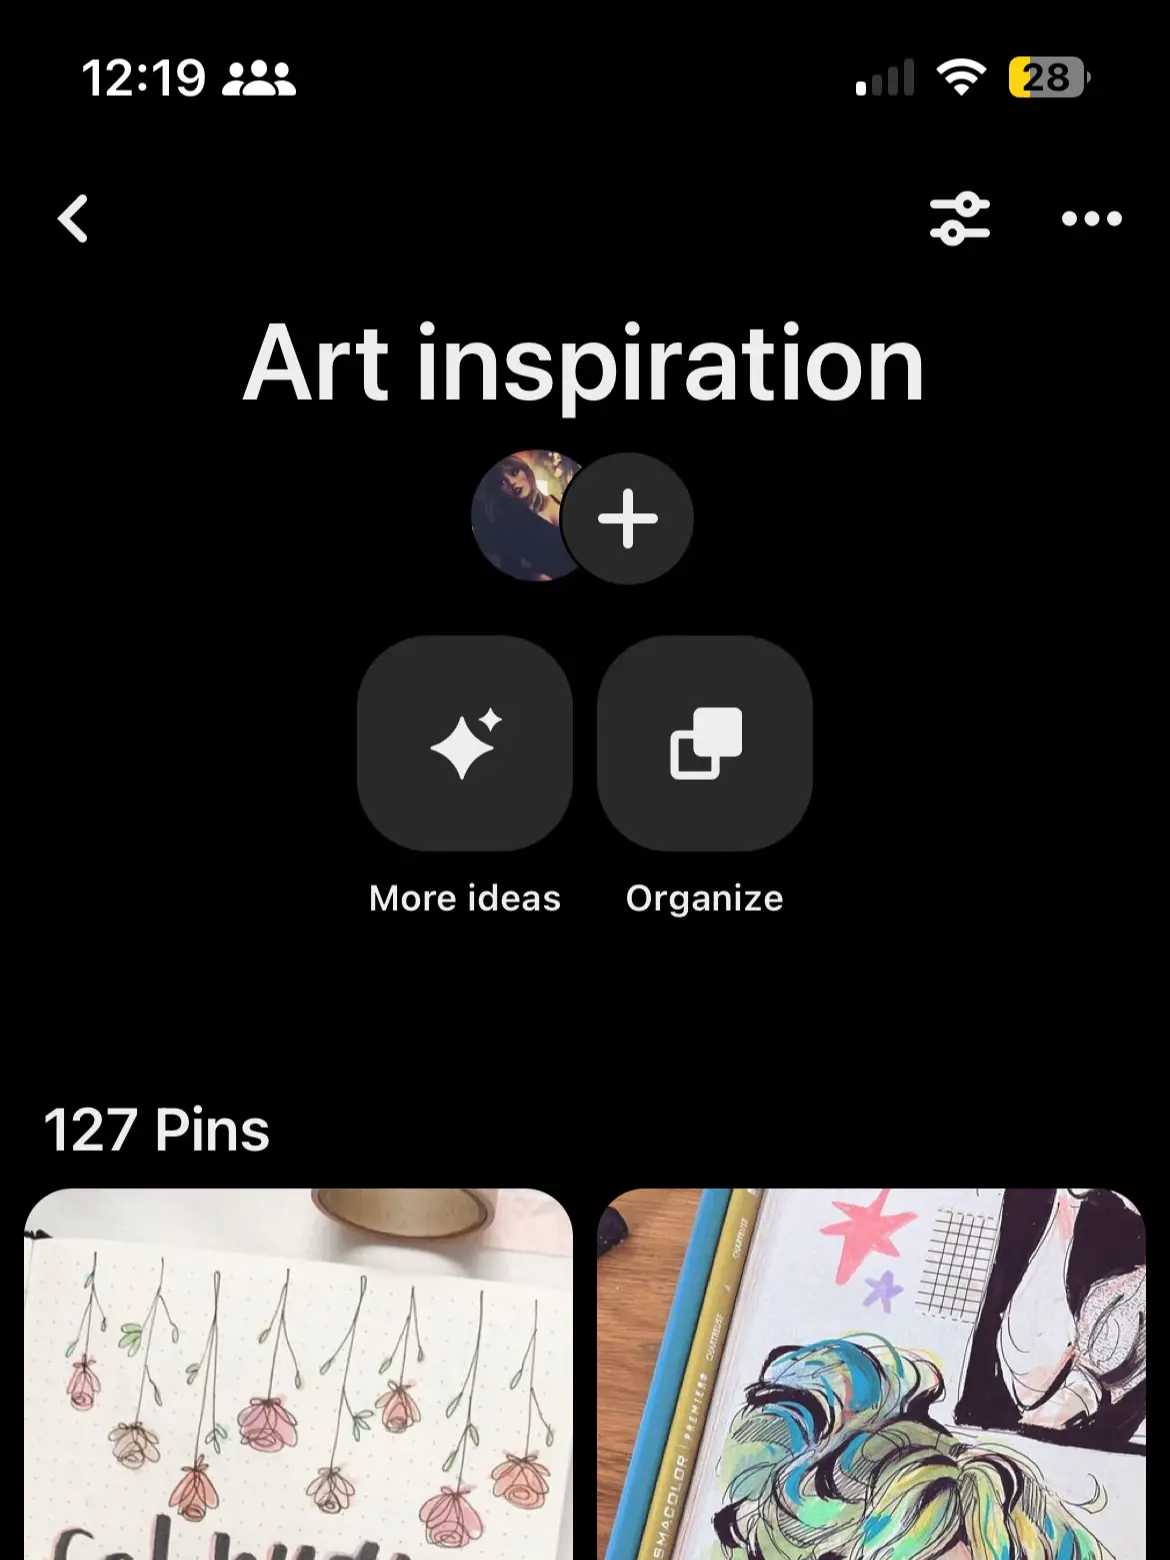 hii check my profile for more pins and ideas💗